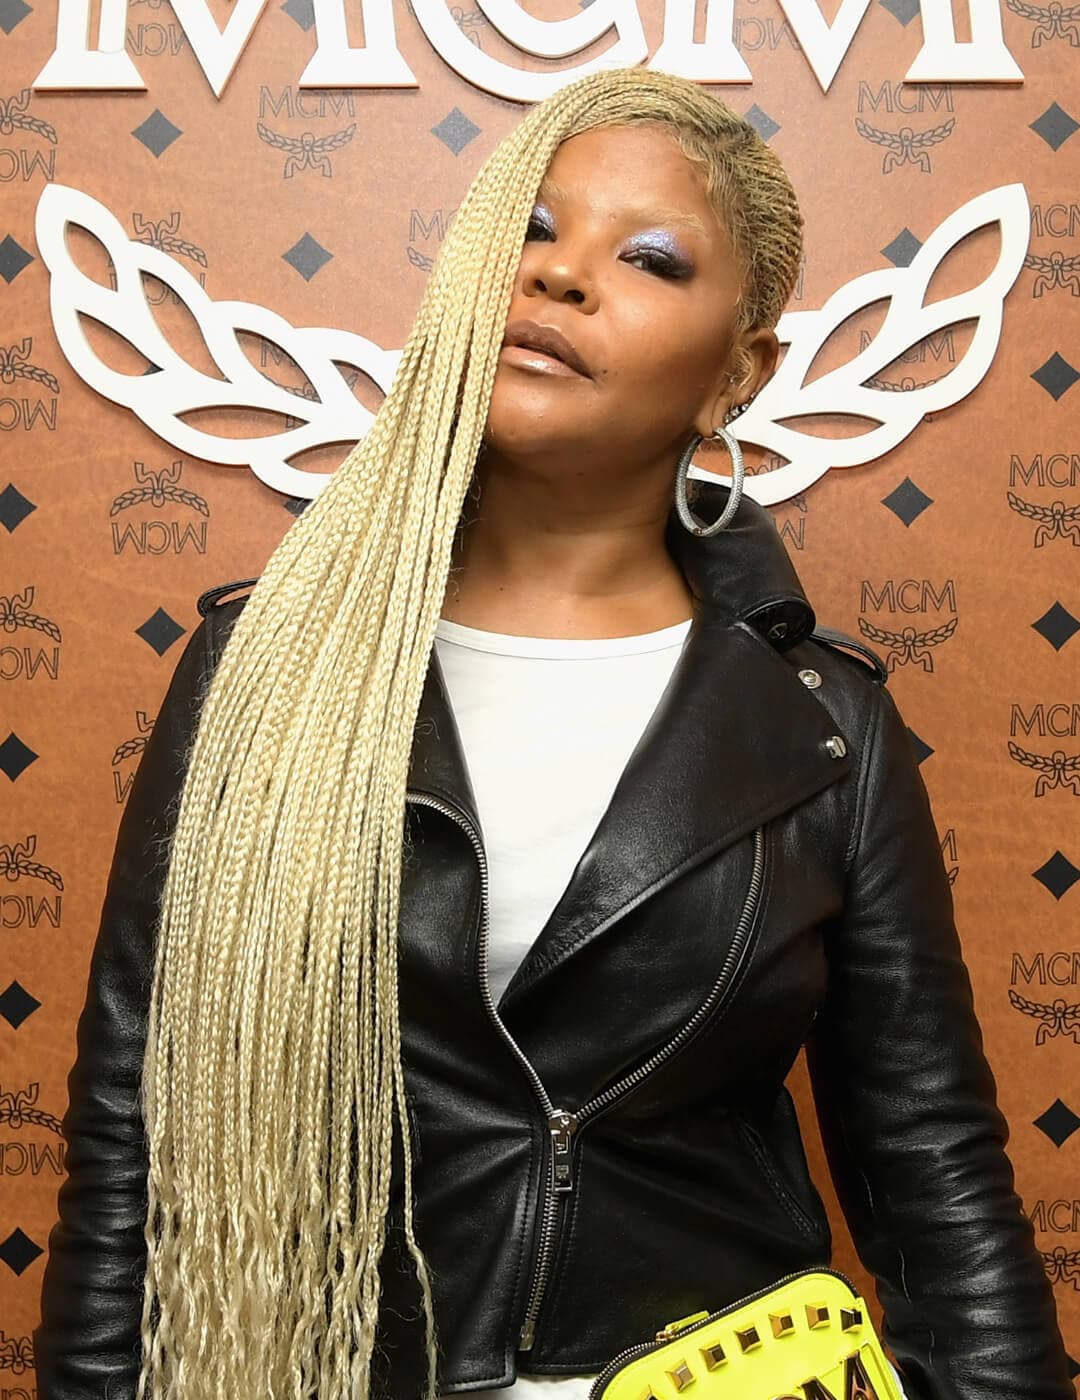 Misa Hylton rocking a blonde lemonade braids hairstyle, black leather jacket and white shirt inside, and silver eyeshadow makeup paired with nude lips